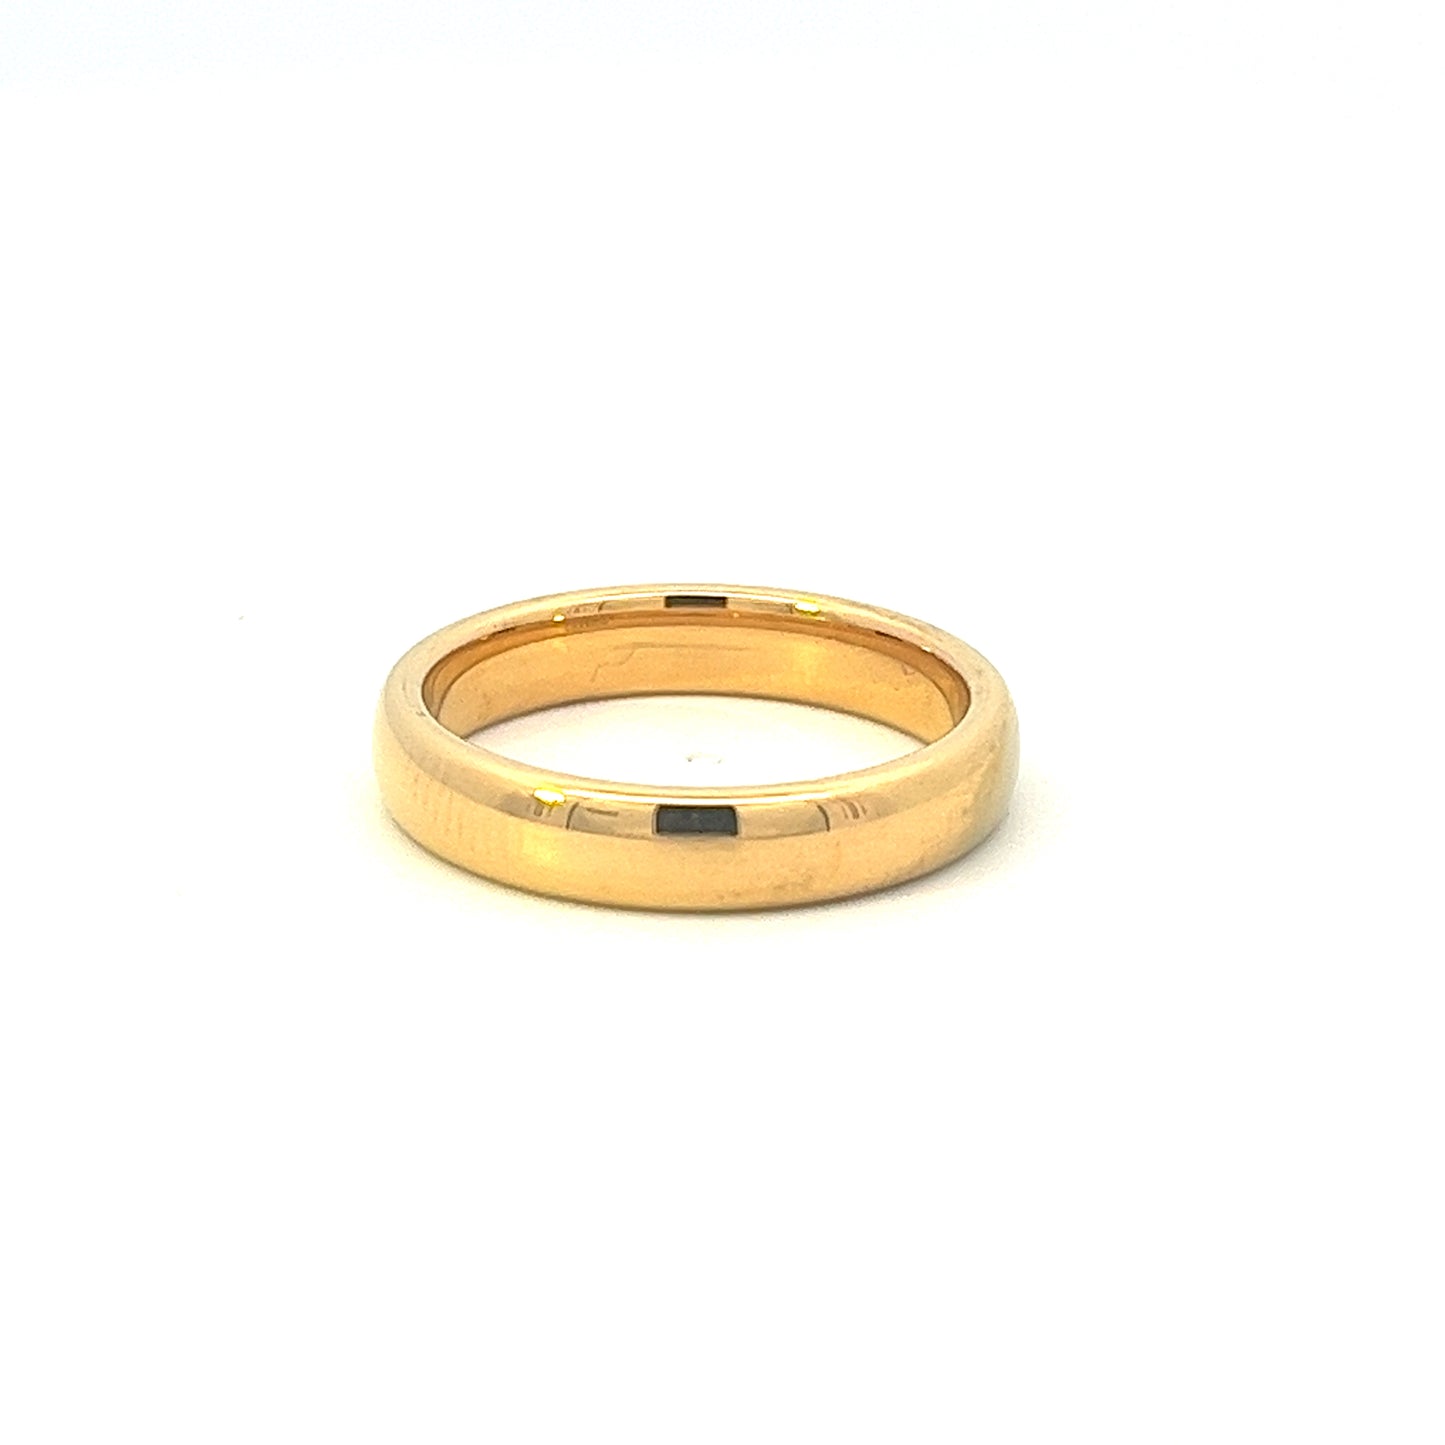 4mm yellow gold plated tungsten wedding band